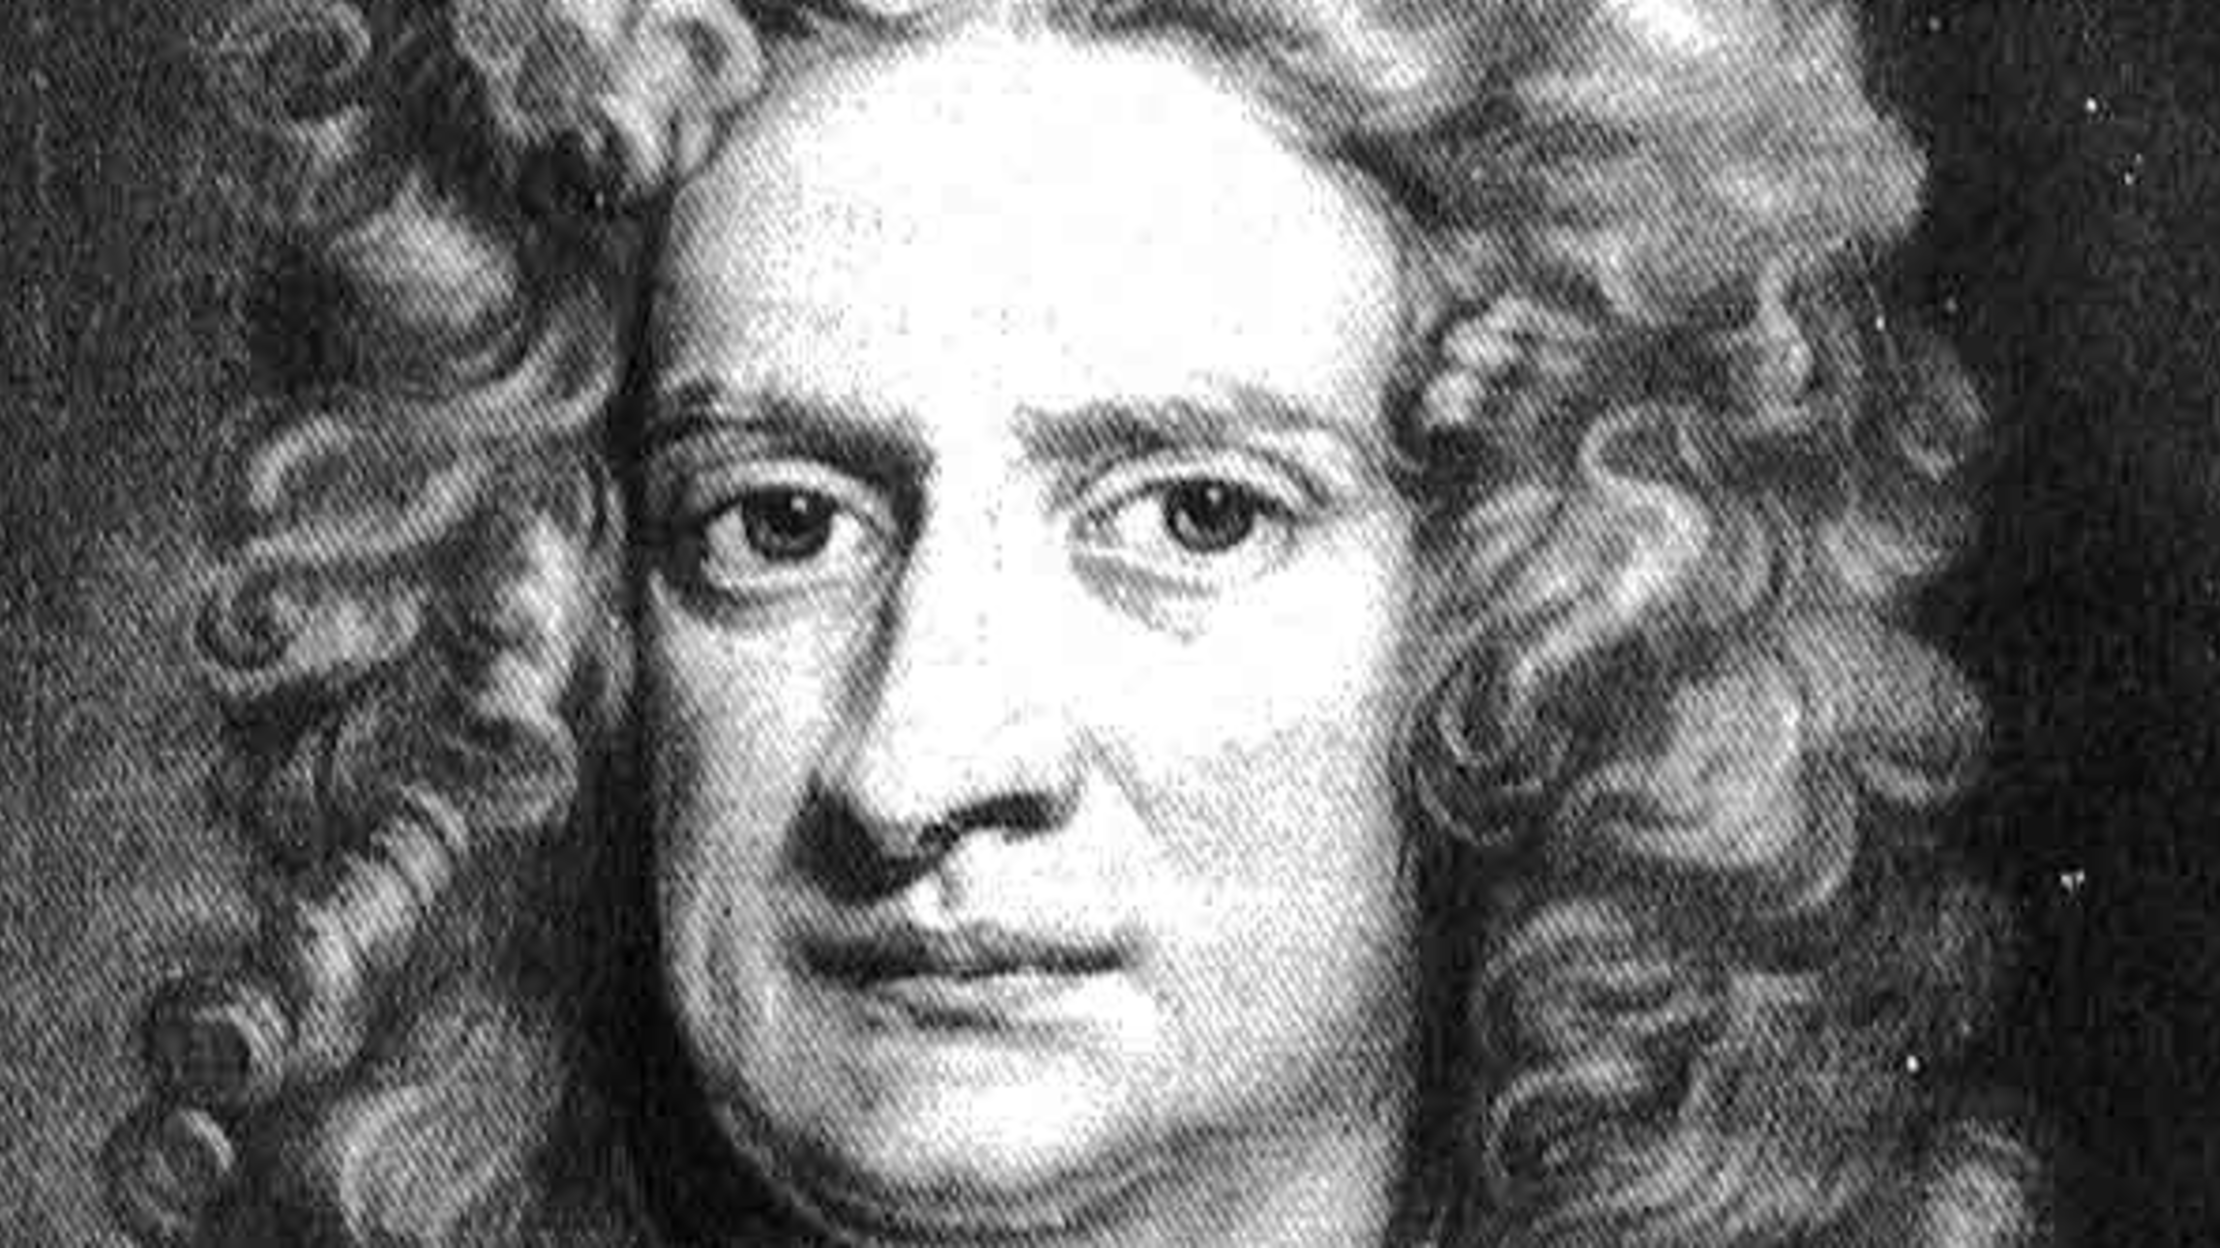 isaac newton pictures